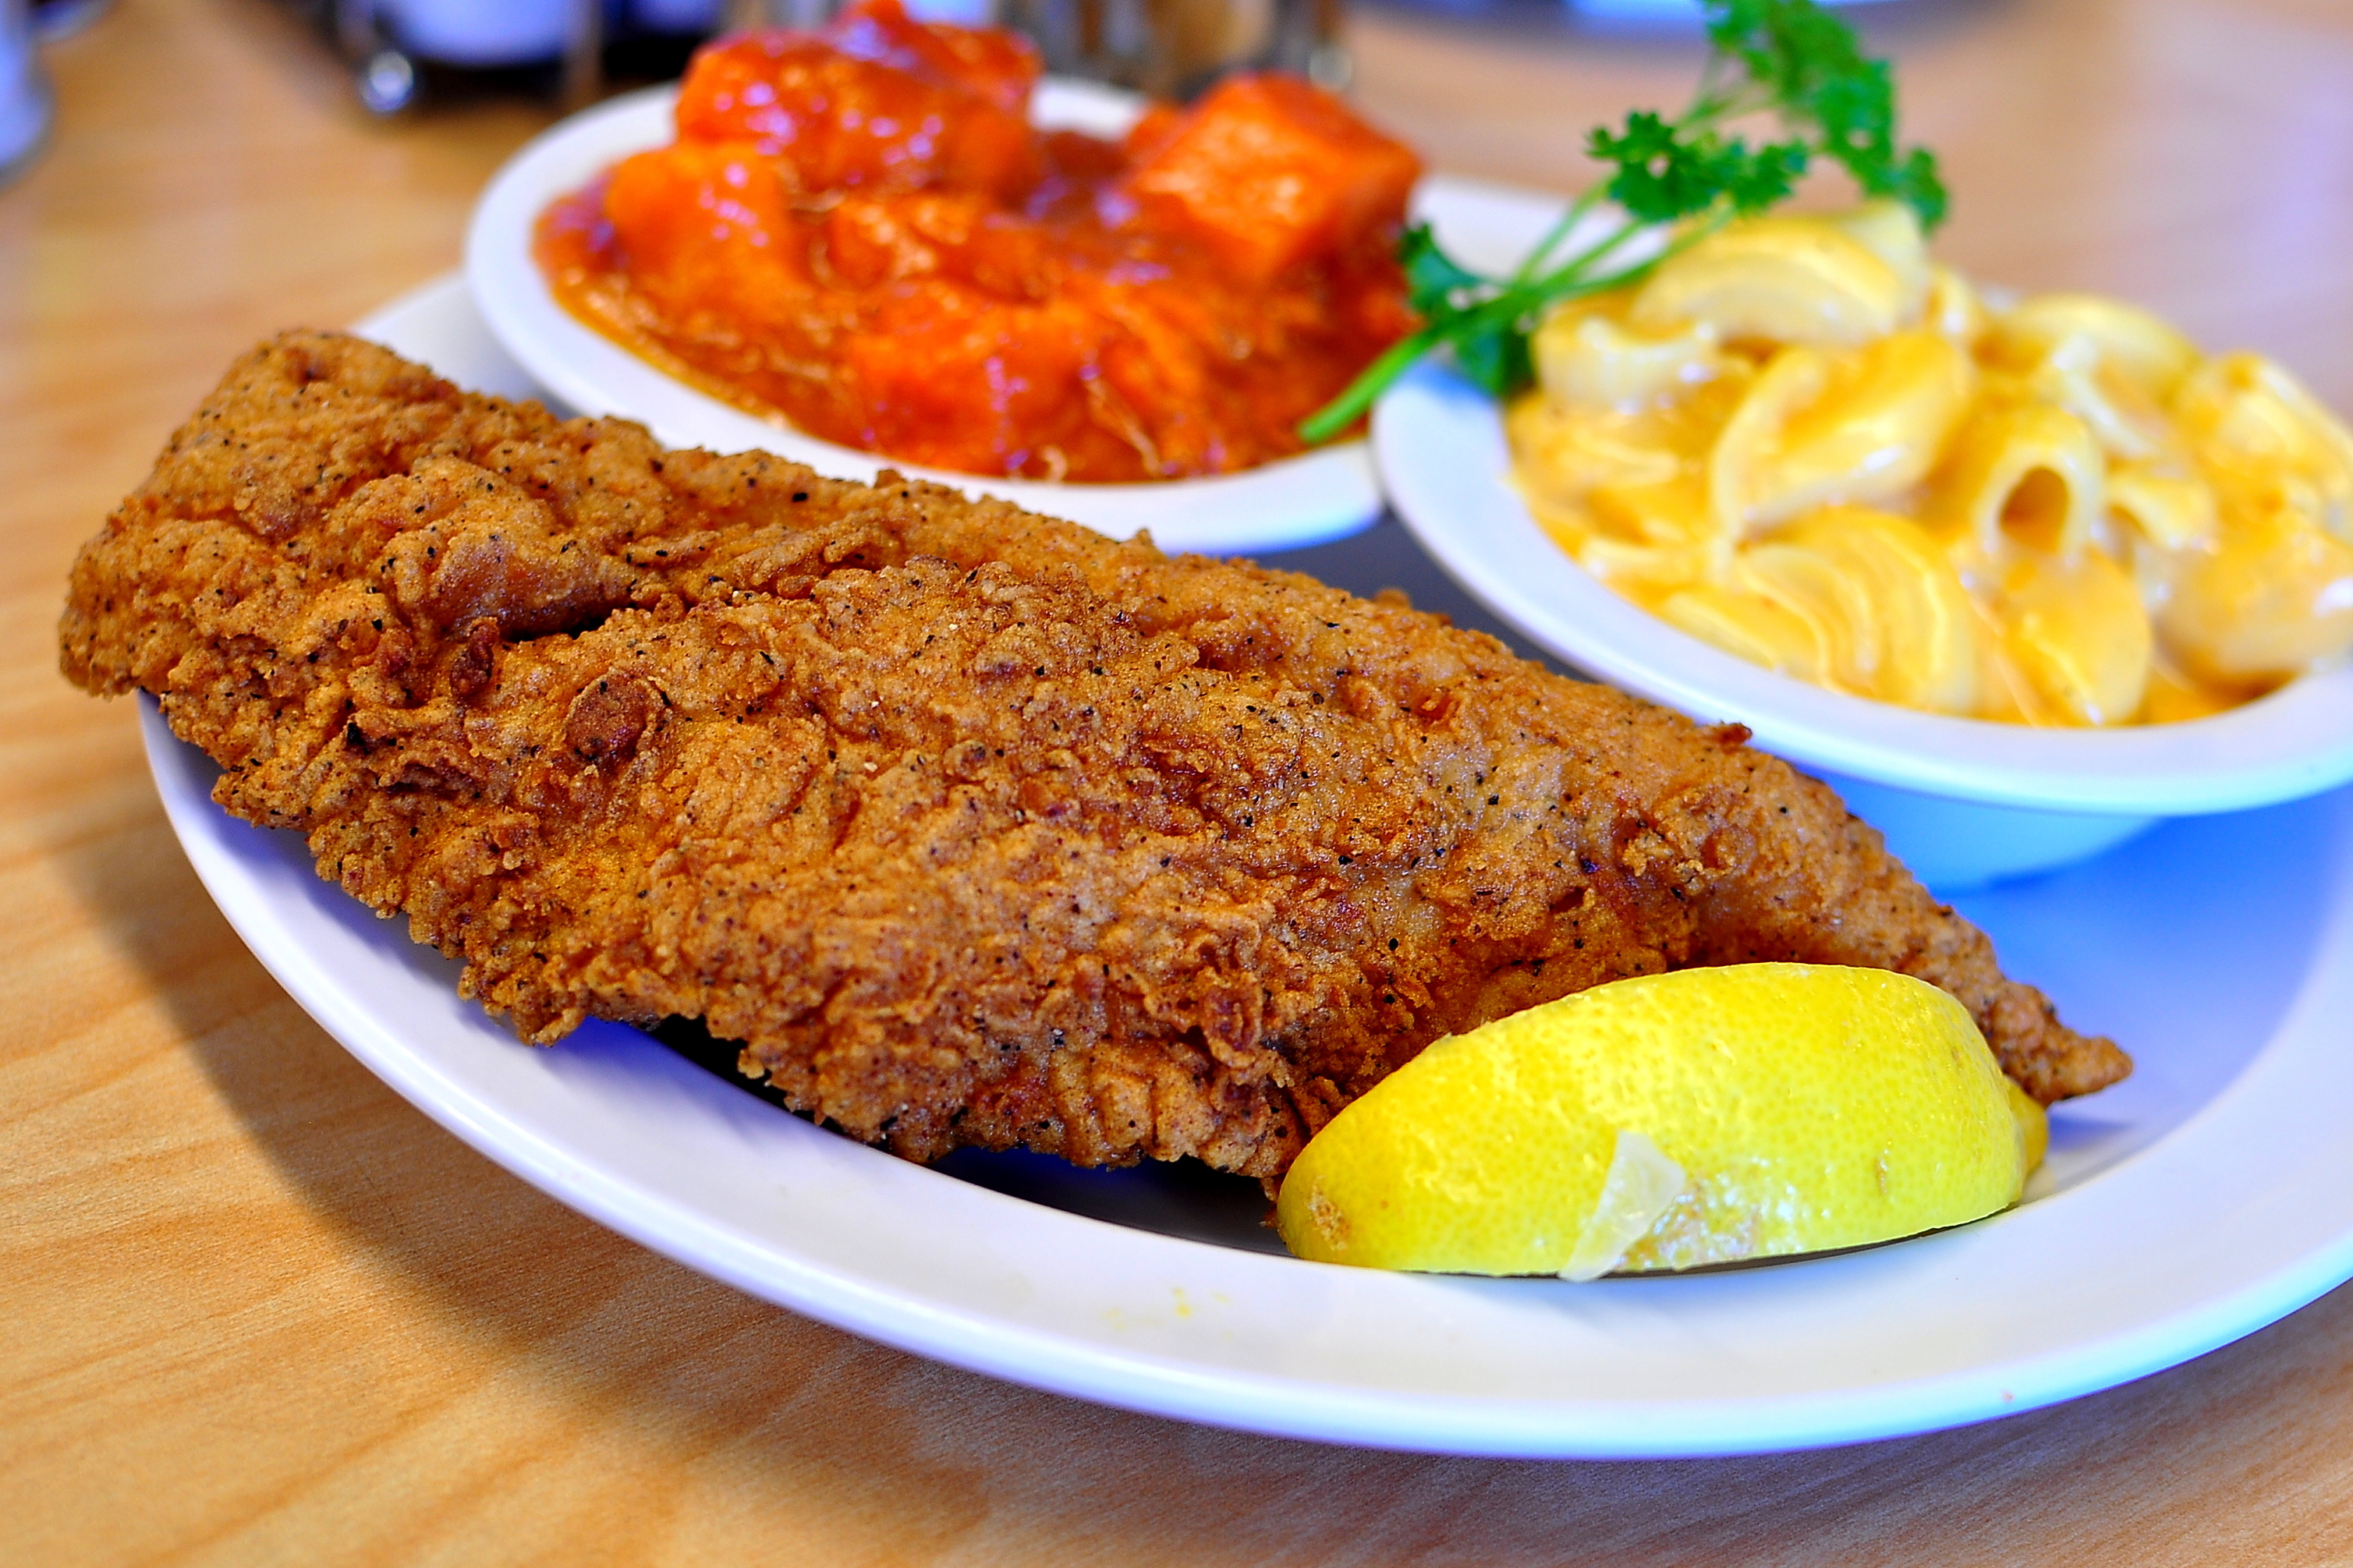 Fried fish from Serving Spoon in Inglewood, California.